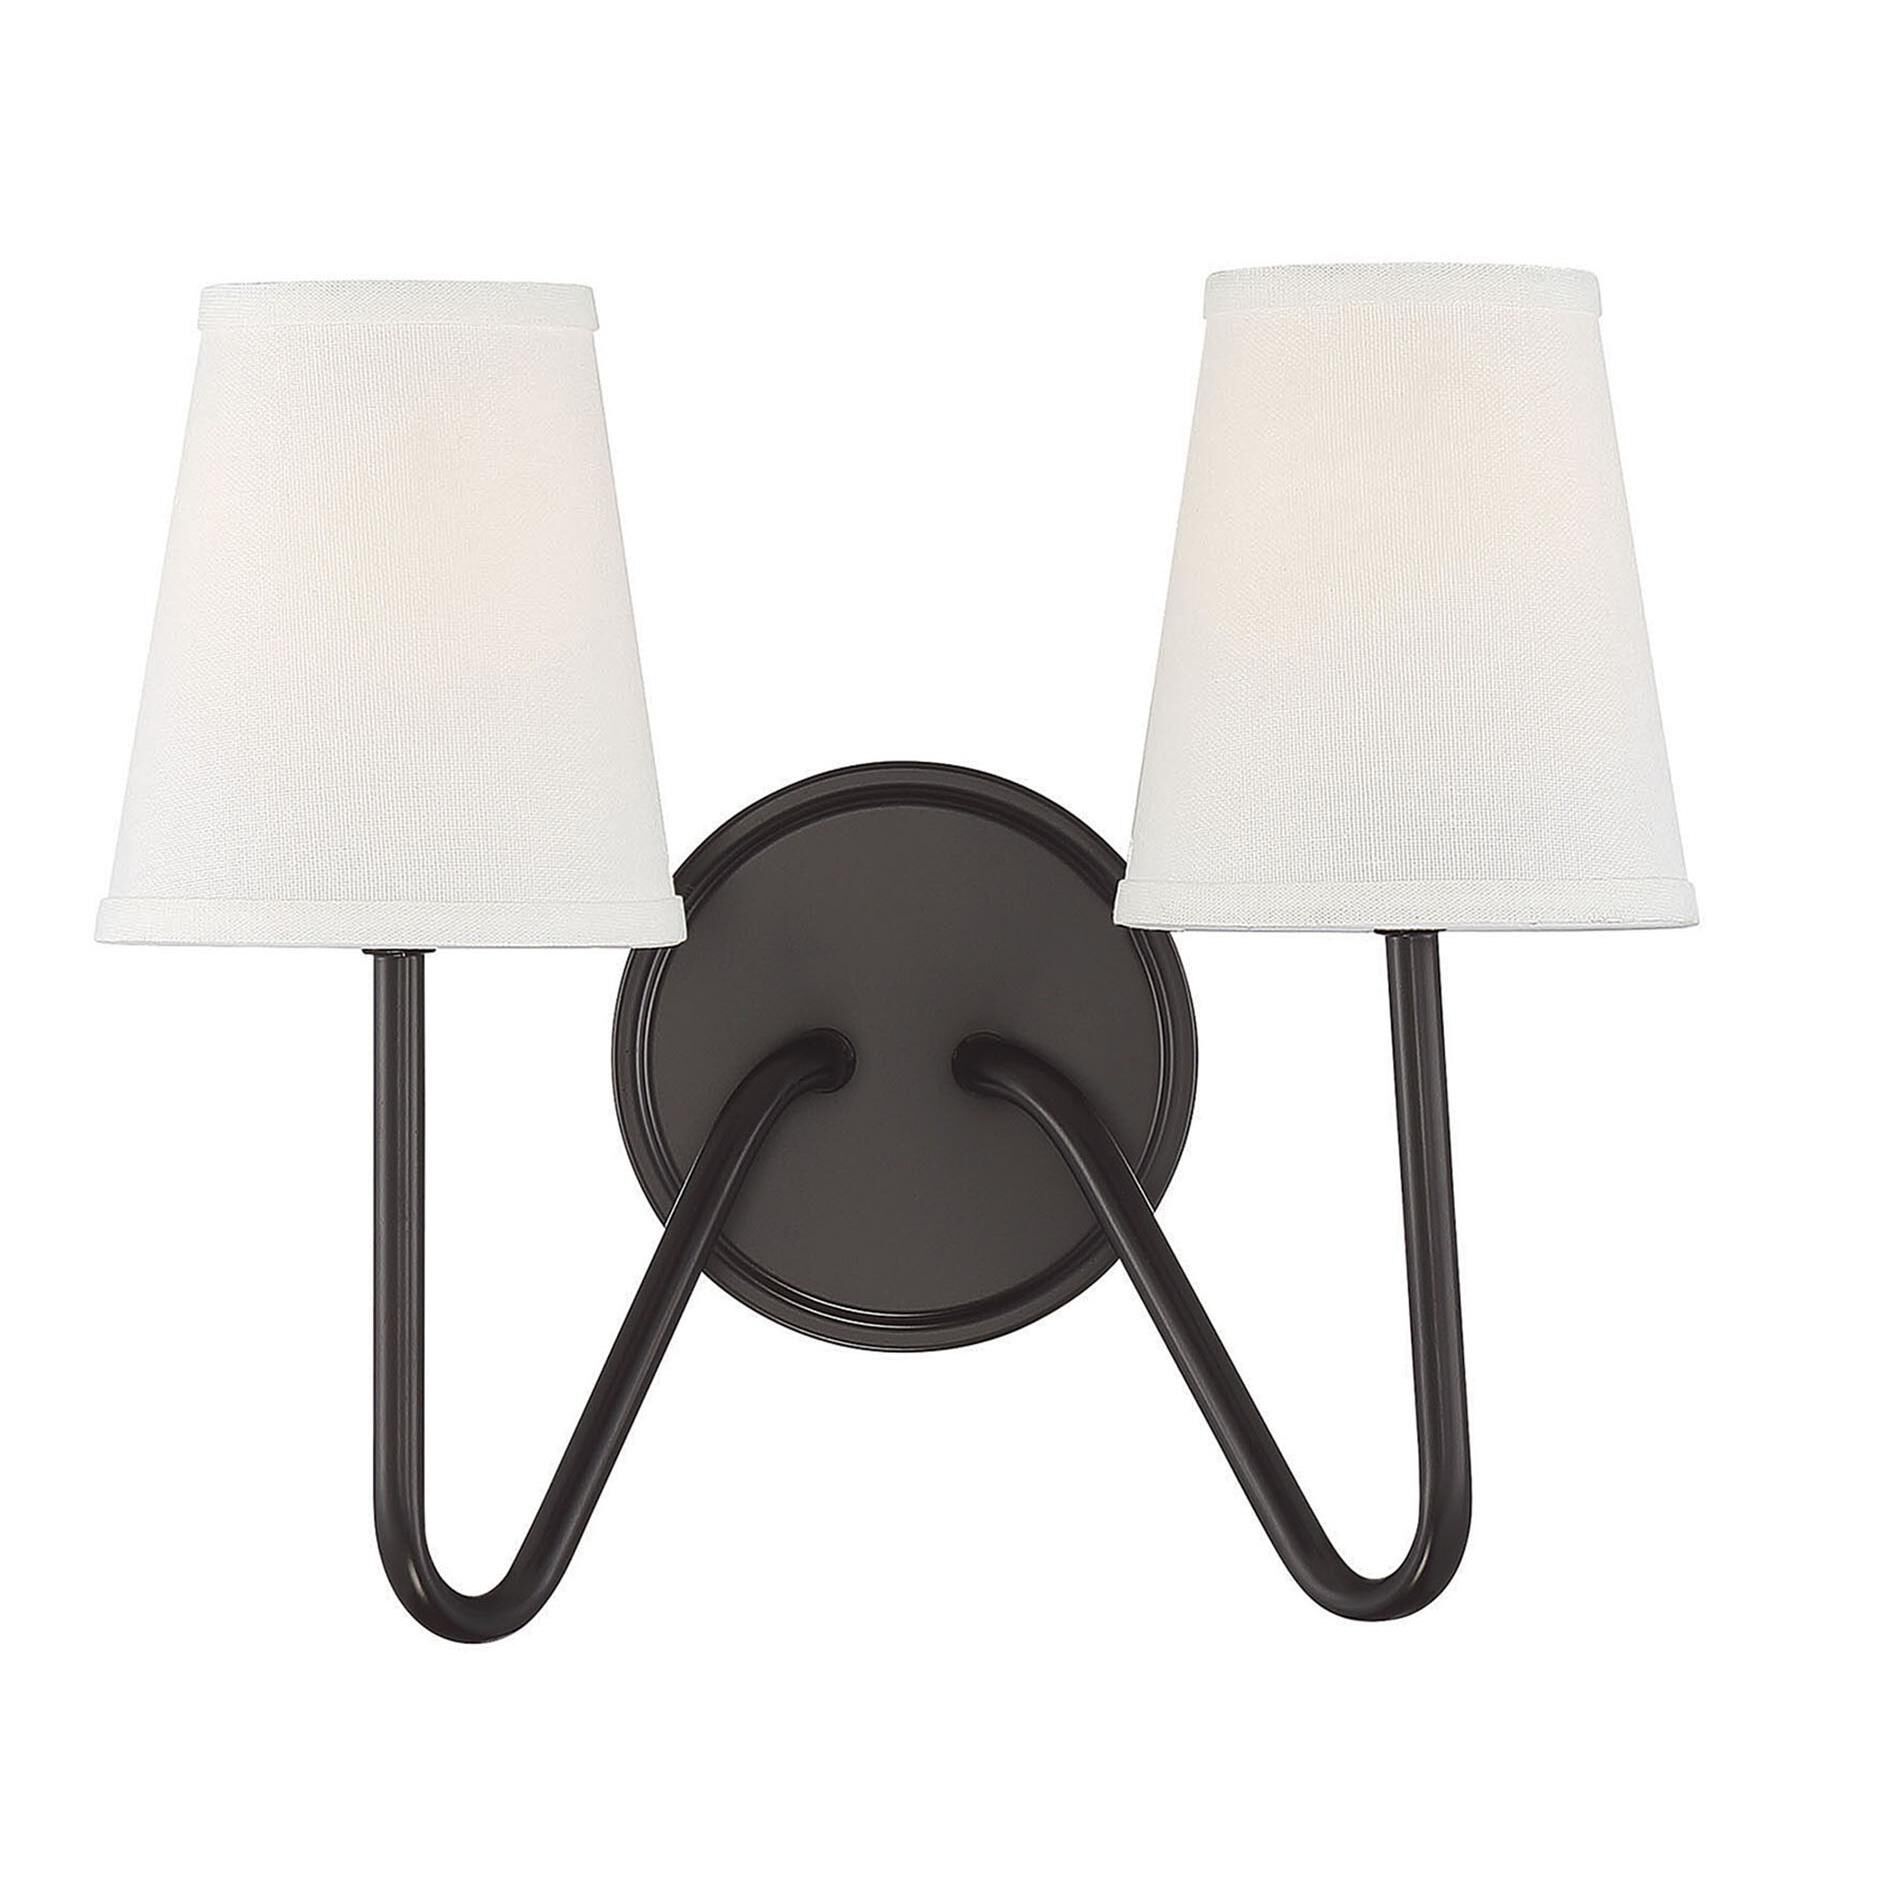 Photos - Chandelier / Lamp Meridian Lighting 13 Inch LED Wall Sconce - M90055ORB - Modern Contemporar